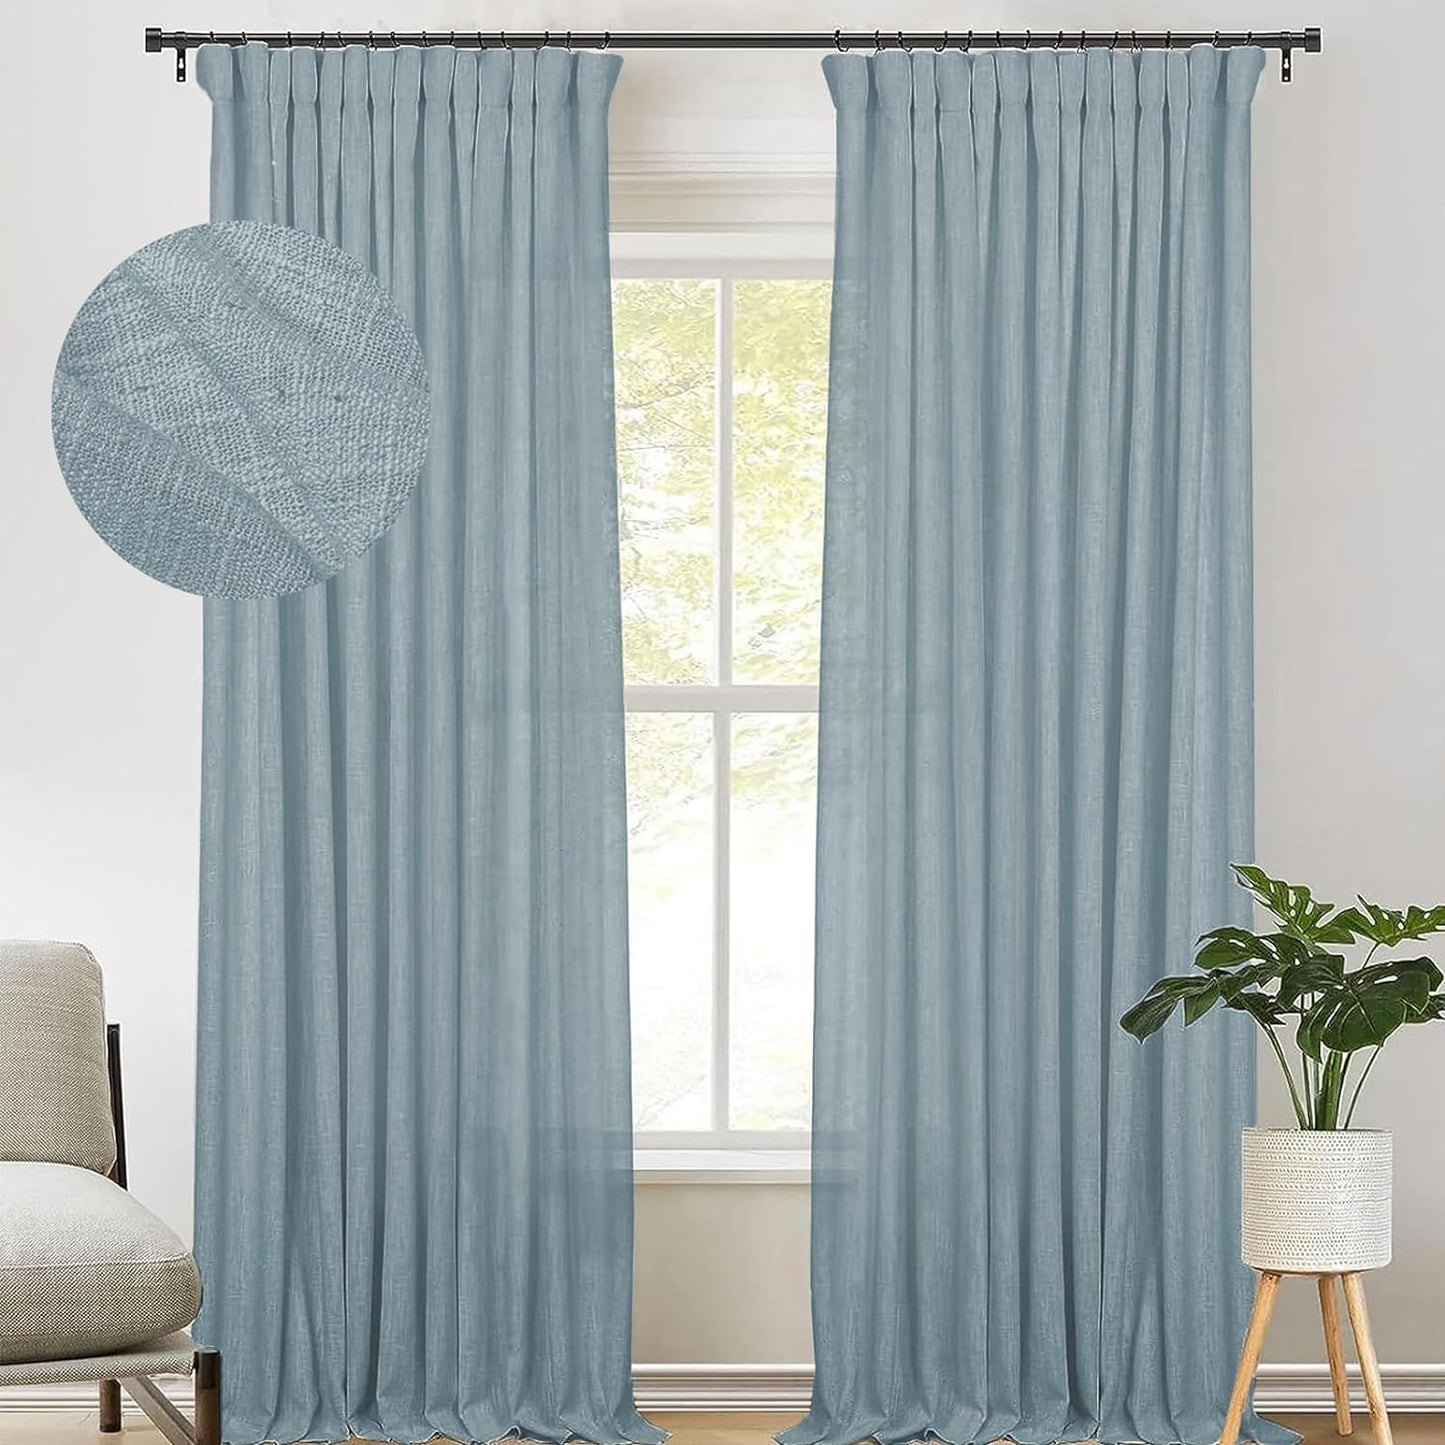 Zeerobee Beige White Linen Curtains for Living Room/Bedroom Linen Curtains 96 Inches Long 2 Panels Linen Drapes Farmhouse Pinch Pleated Curtains Light Filtering Privacy Curtains, W50 X L96  zeerobee 08 Sea Green 50"W X 84"L 